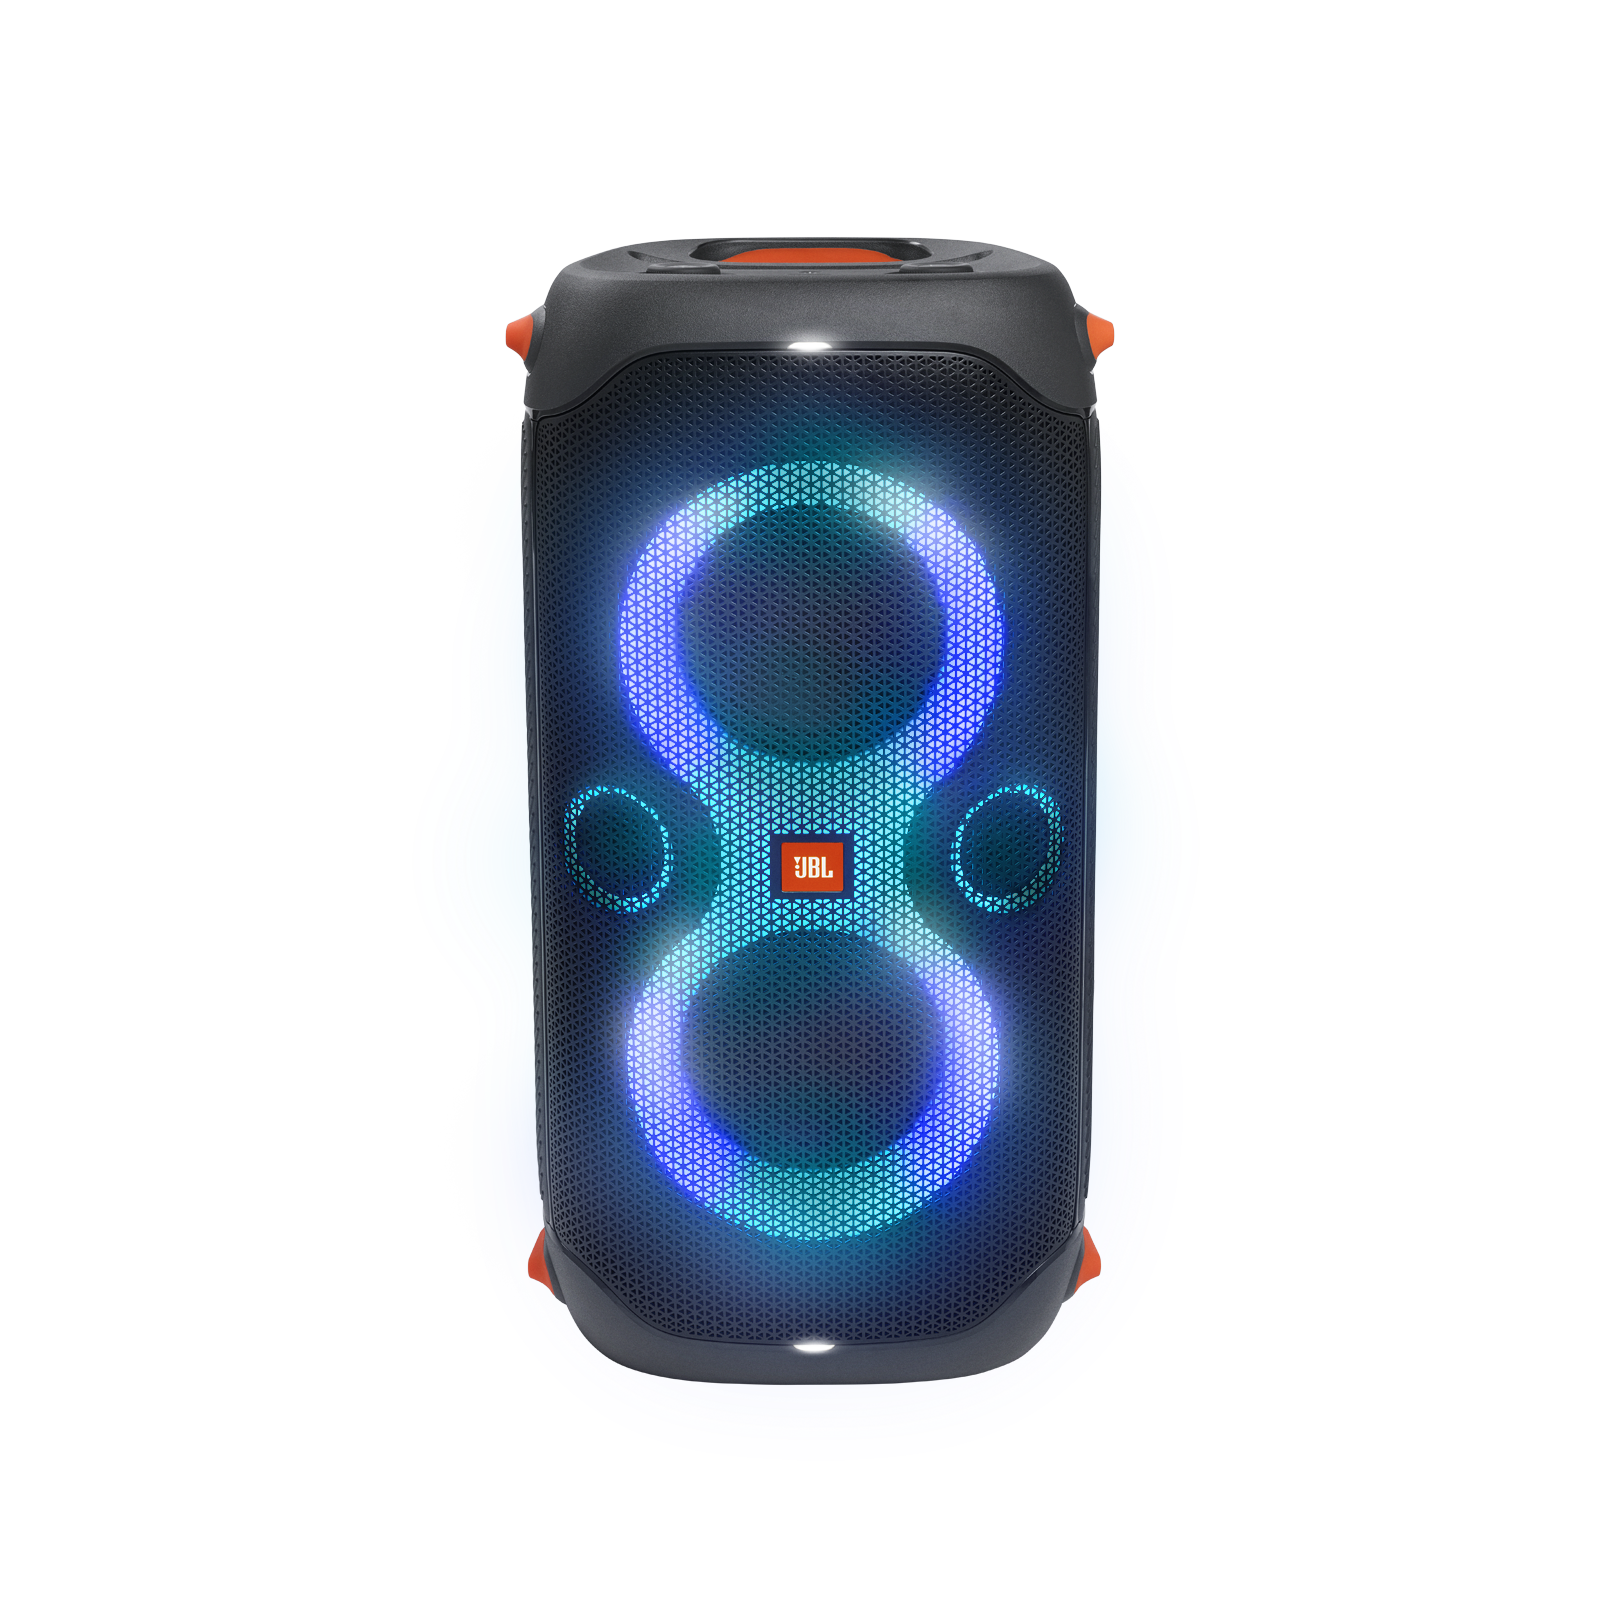 JBL Partybox 110 - Black - Portable party speaker with 160W powerful sound, built-in lights and splashproof design. - Front